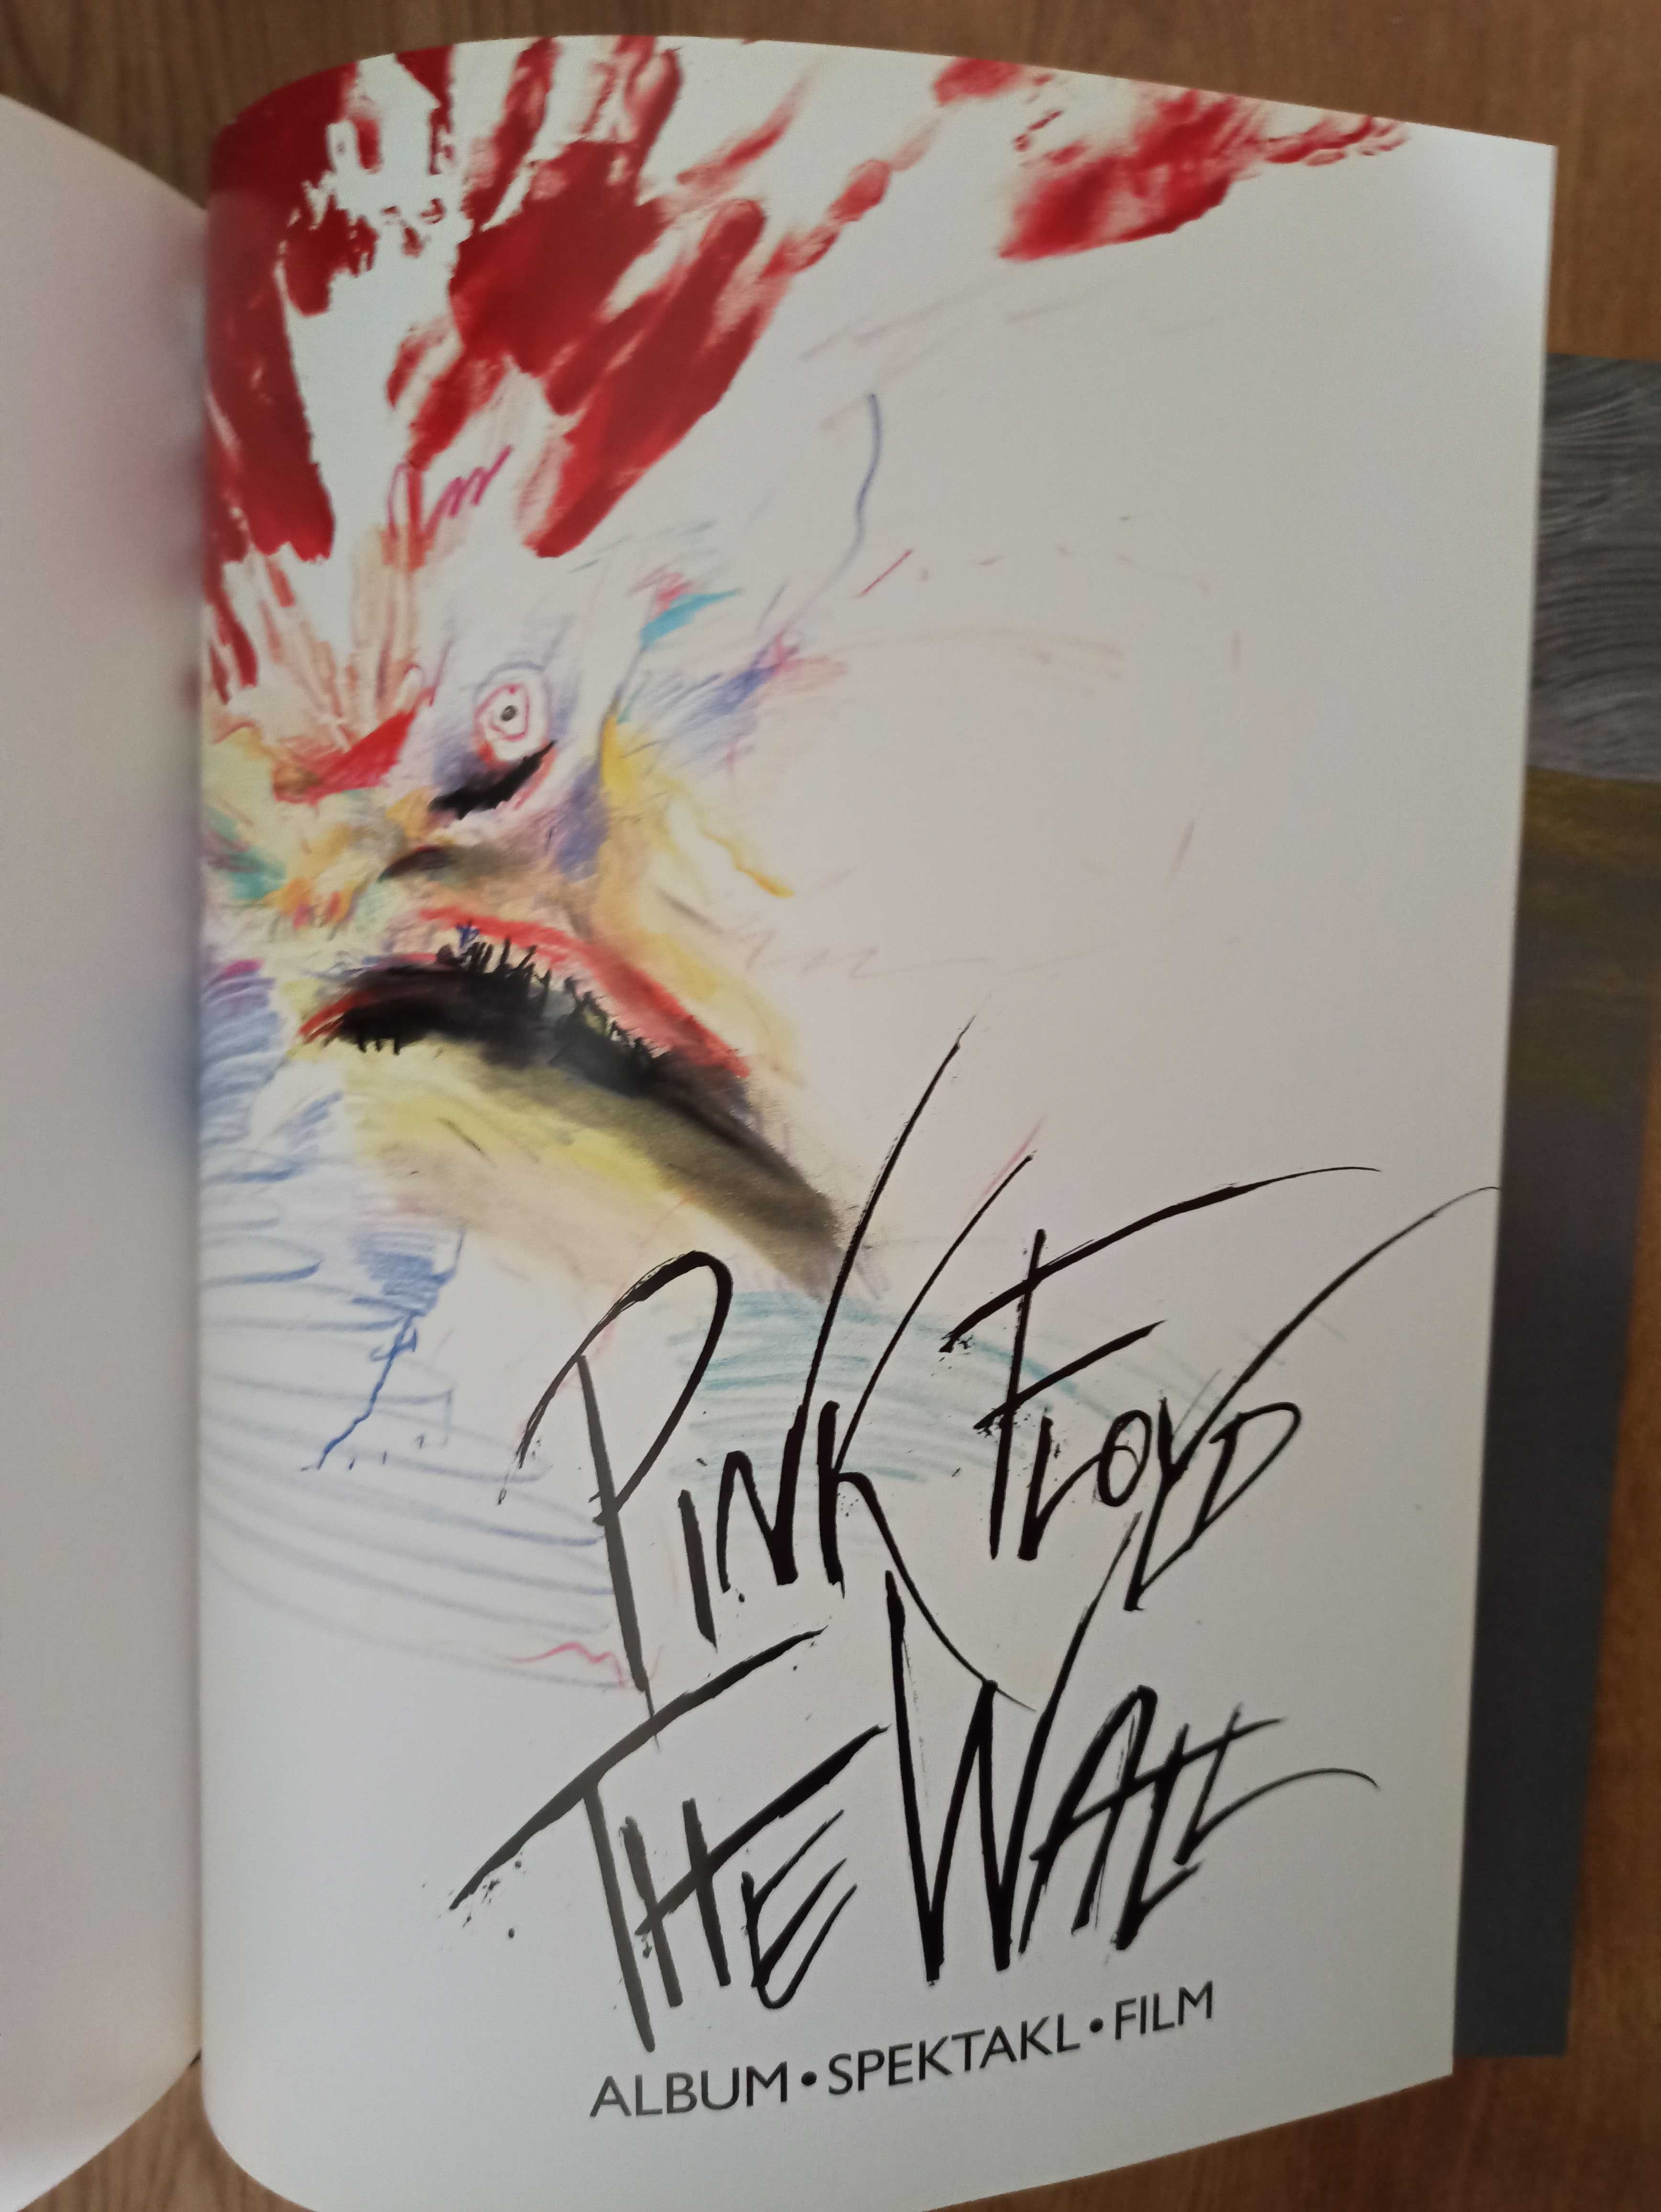 Gerald Scarfe

The Making of Pink Floyd The Wall